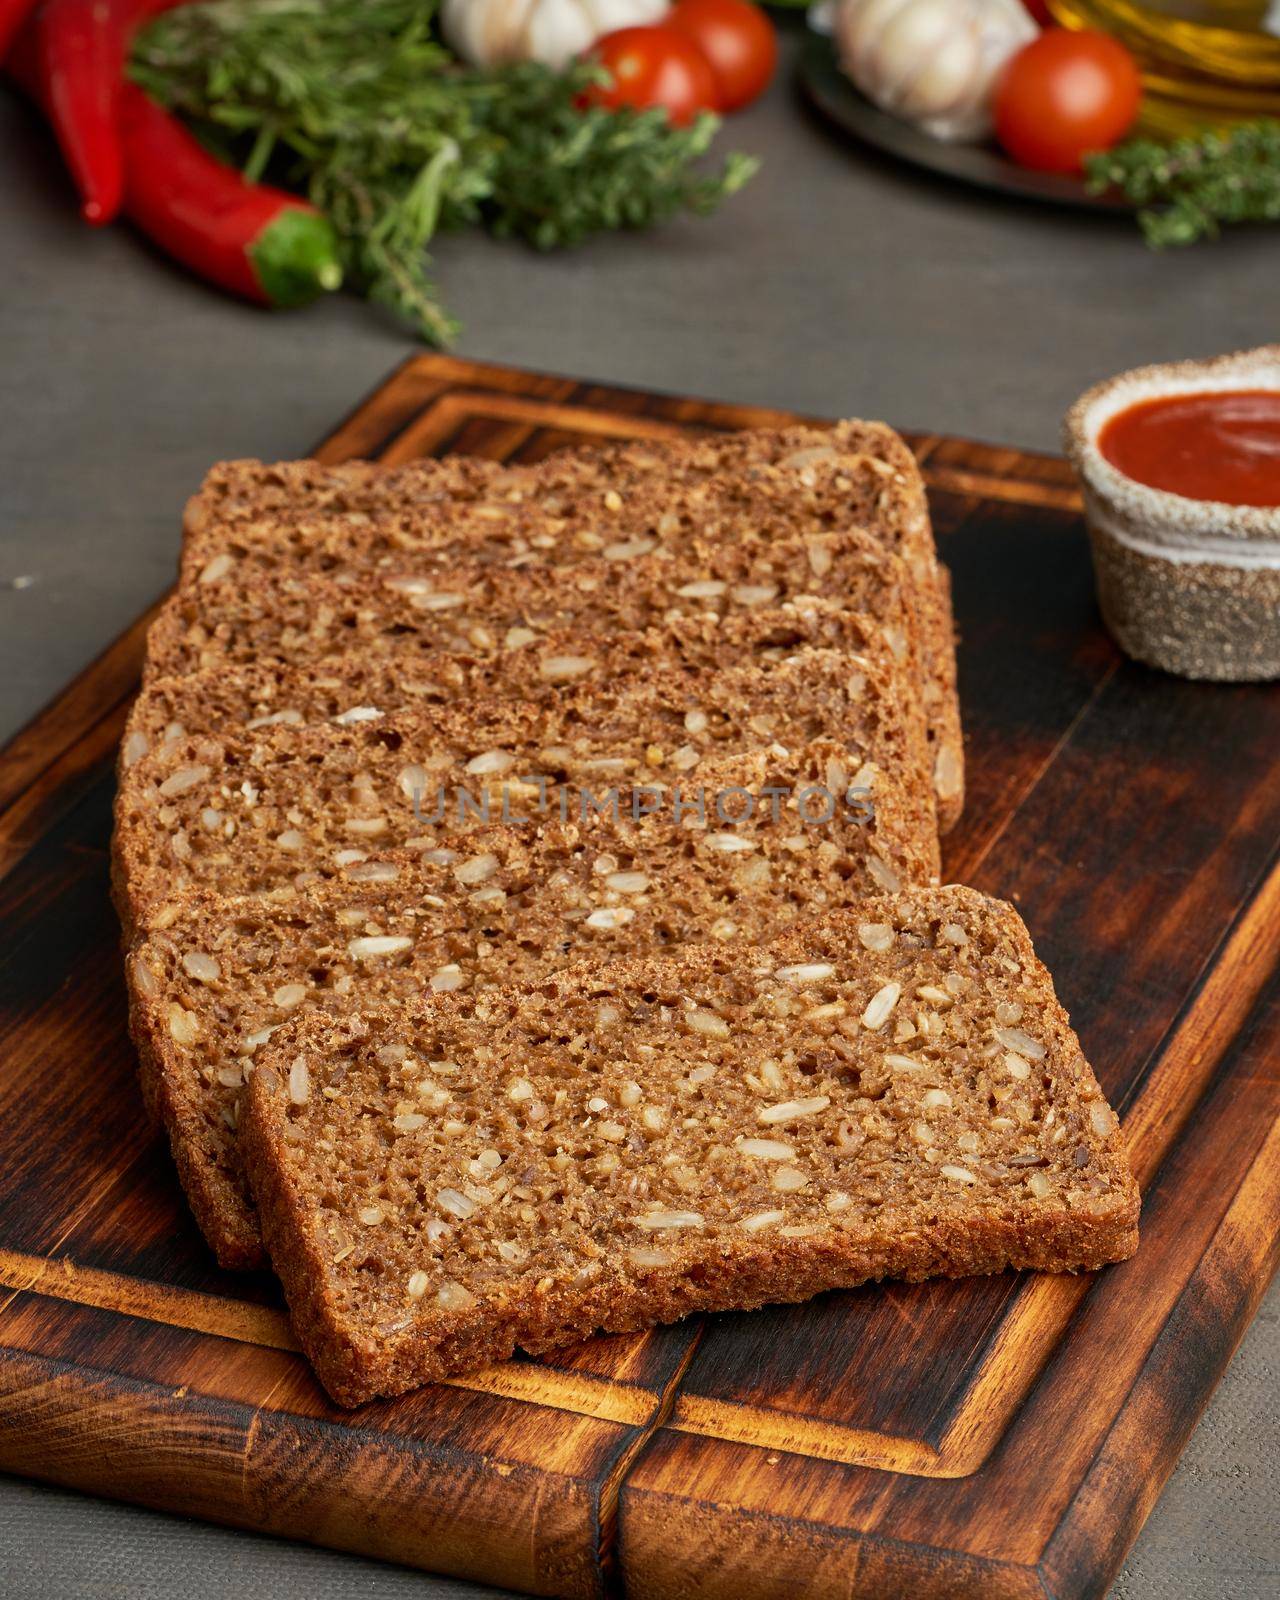 Toasted rye grain bread on a wooden cutting board on dark brown background. by NataBene